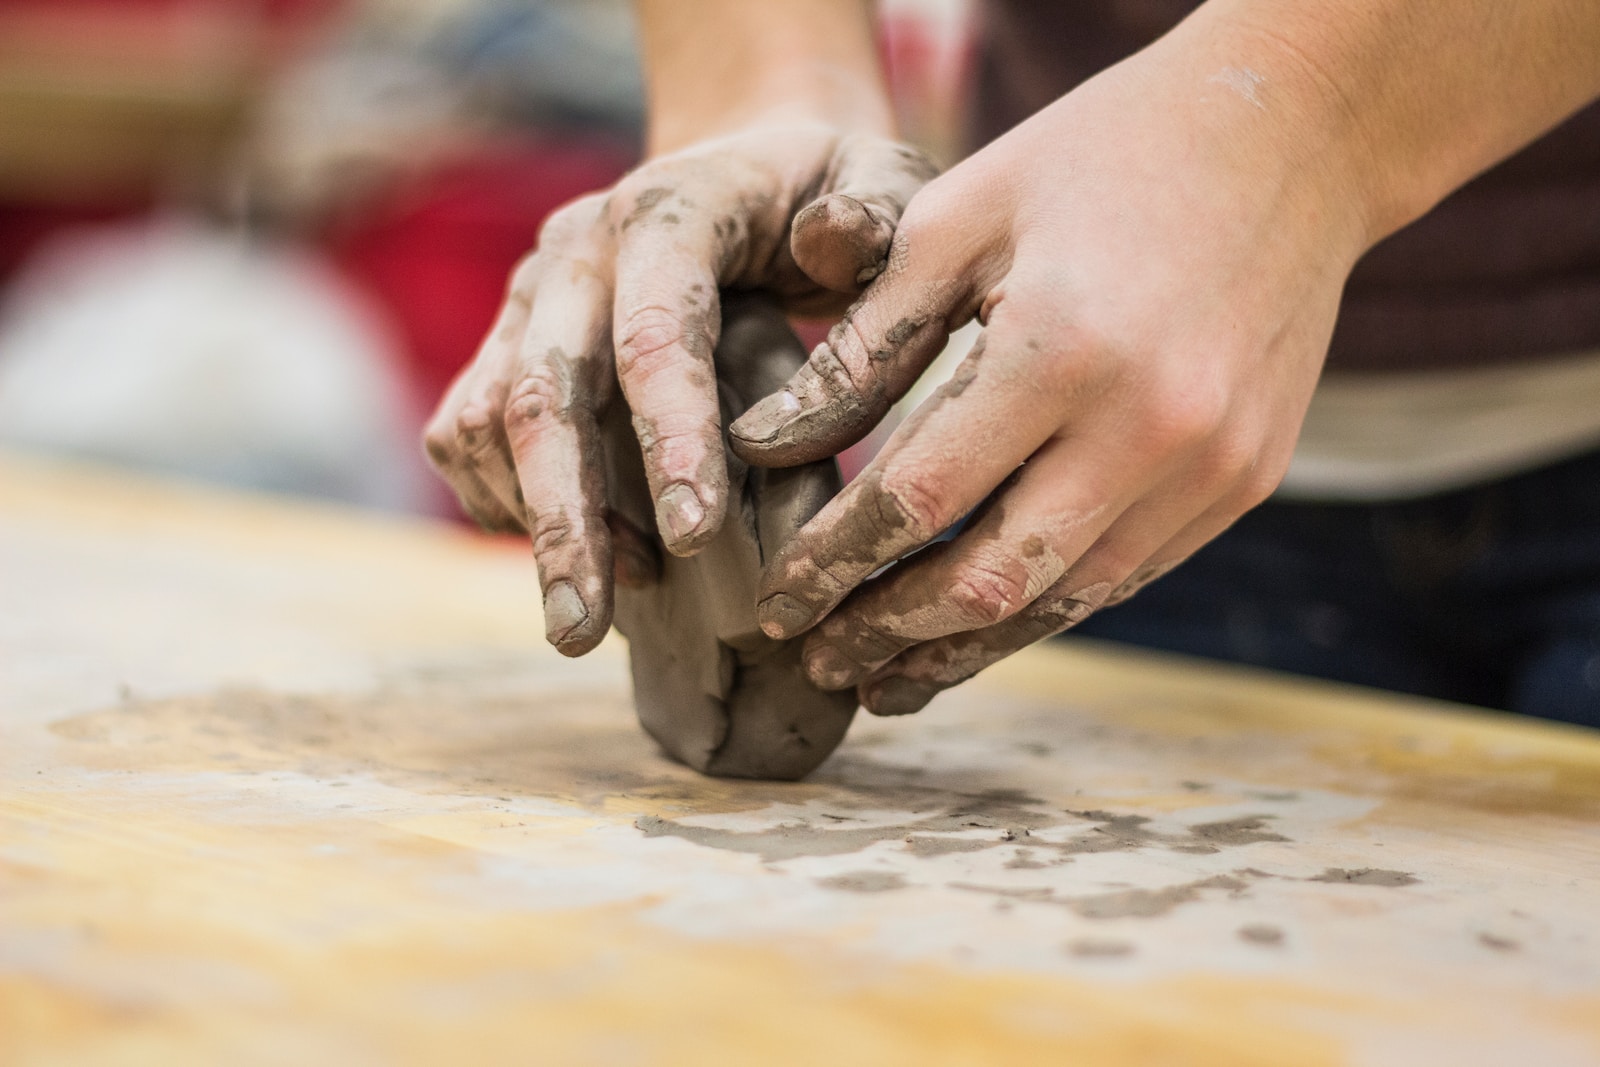 A clay stained hand of a potter engaging in a craft work of pottery or molding